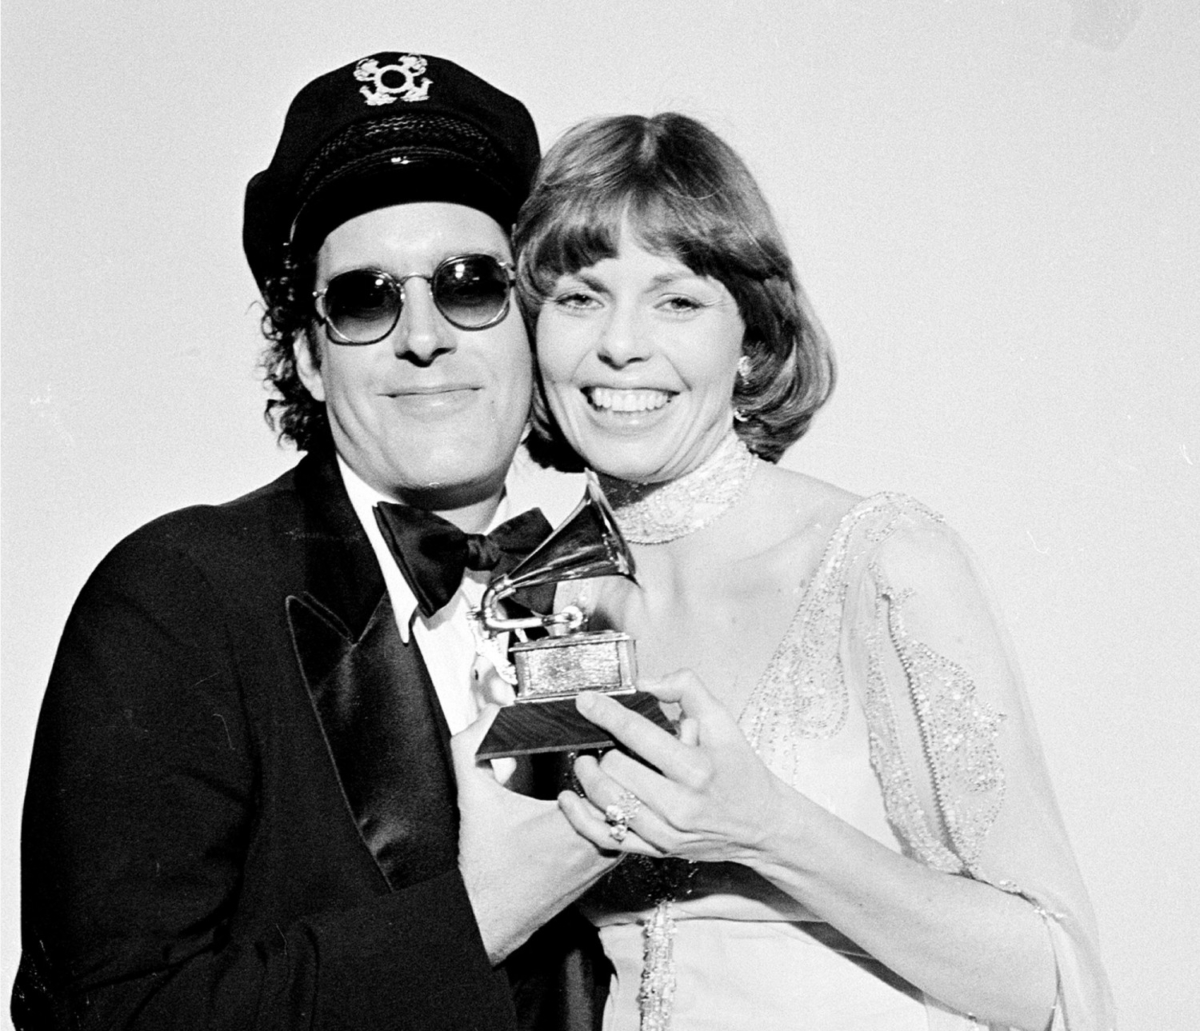 This photo shows Daryl Dragon and his wife Toni Tennille, of the Captain &a...